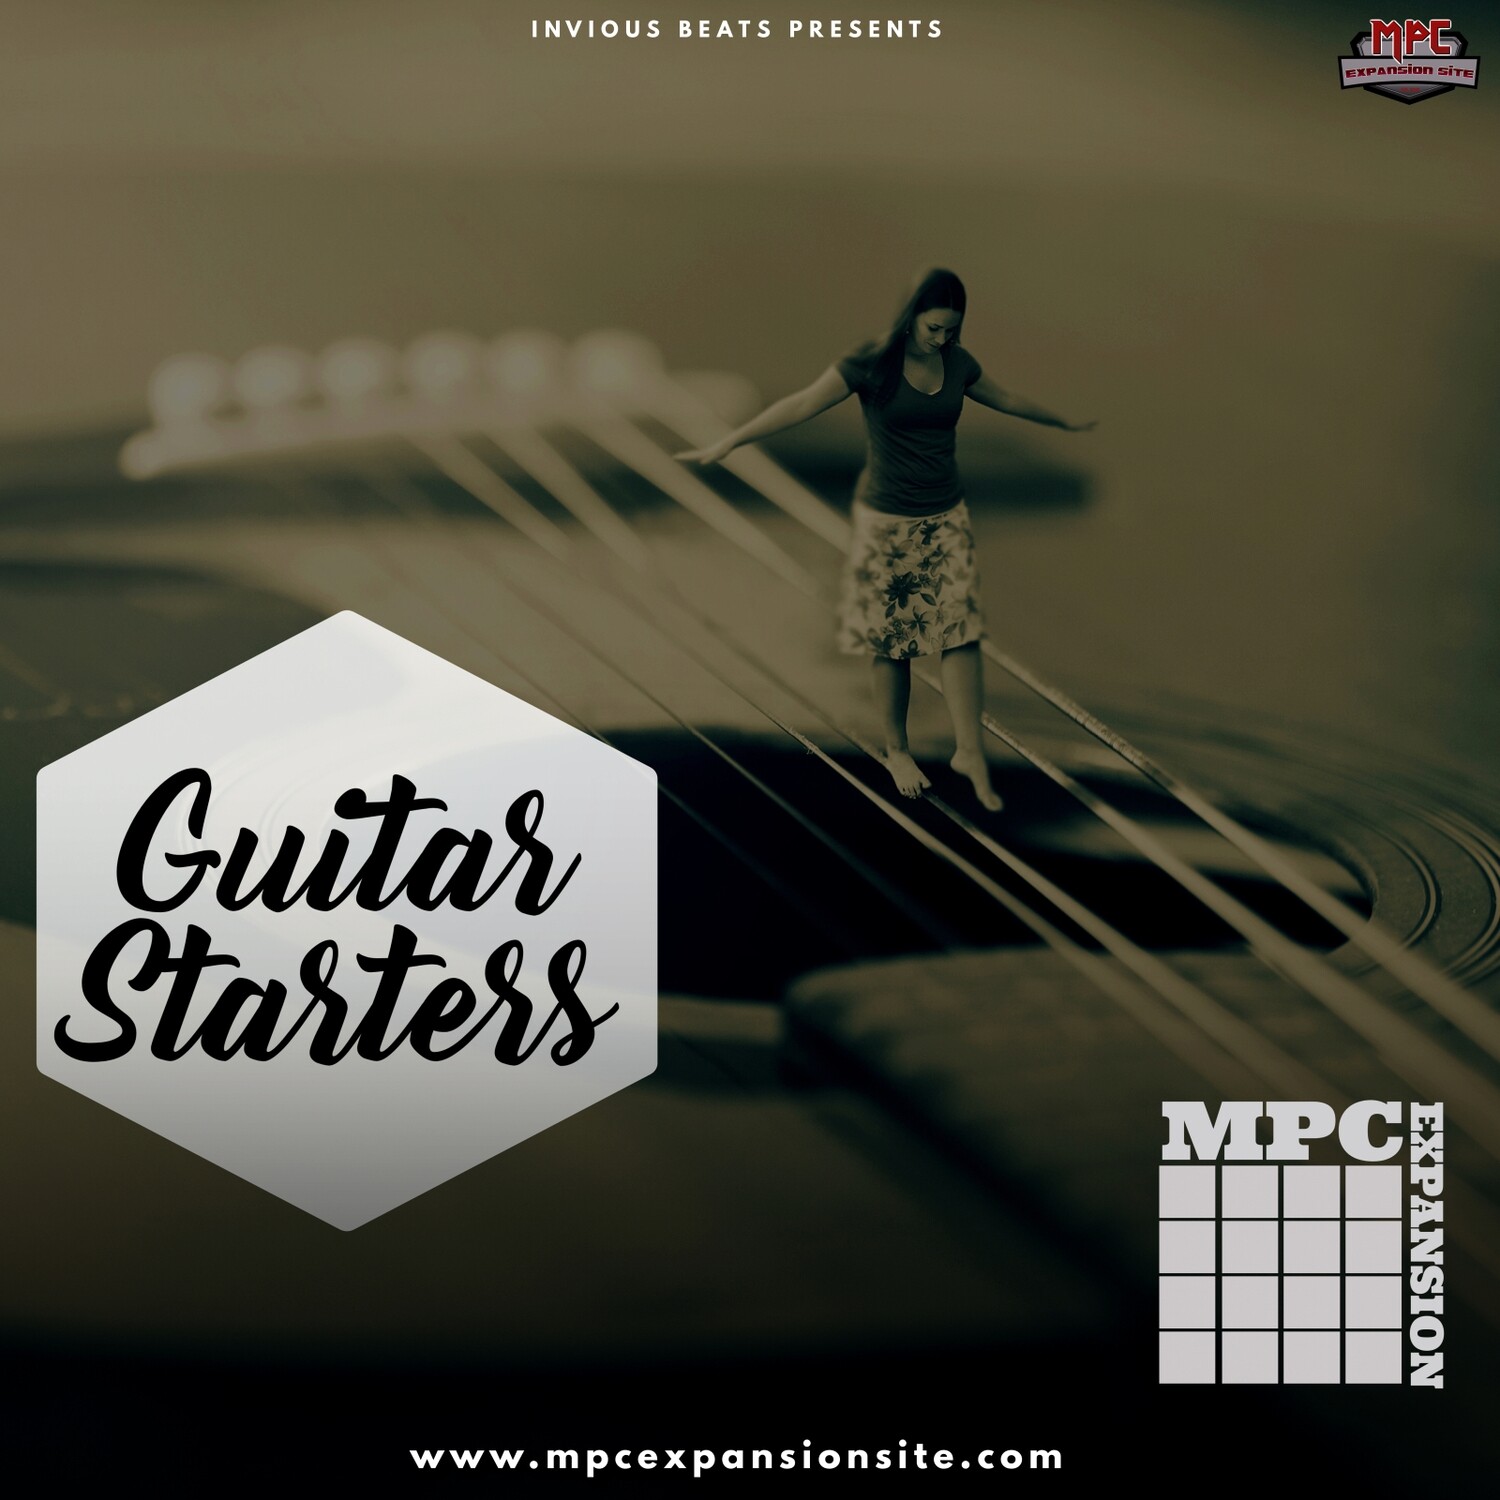 MPC EXPANSION 'GUITAR STARTERS' by INVIOUS